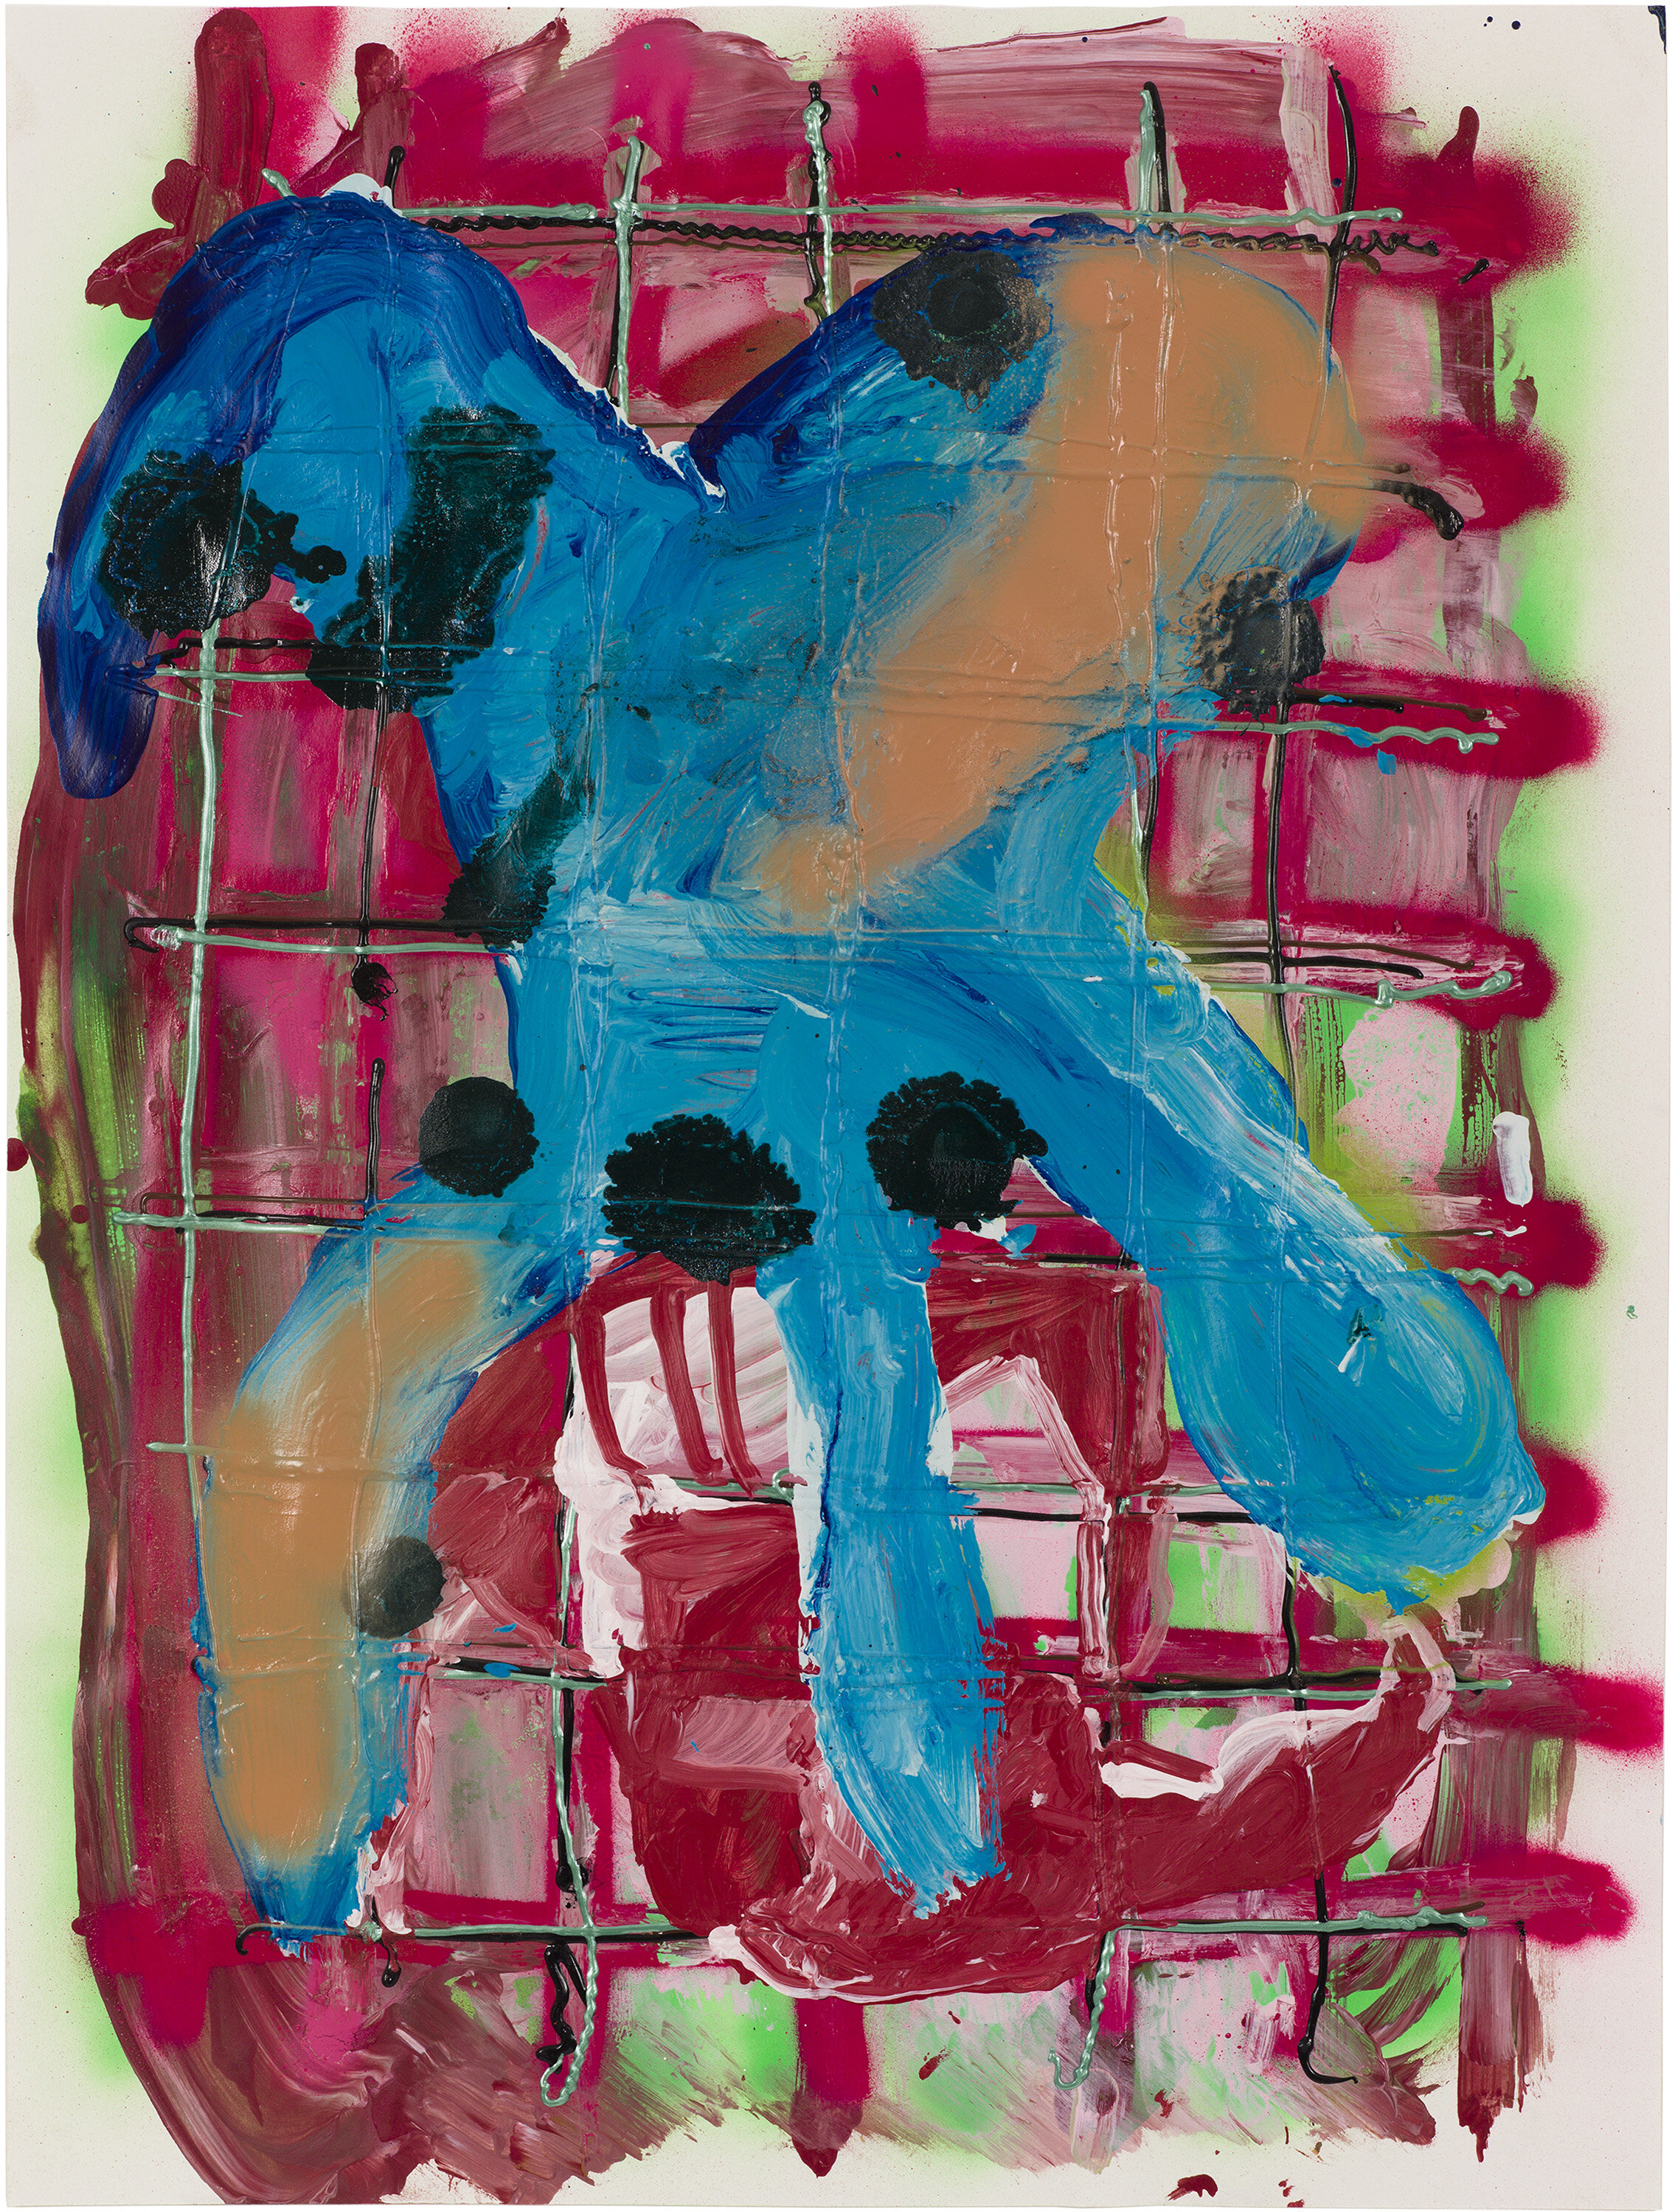  Drew Beattie and Ben Shepard   DBBS-DRW-2015-504   2015  acrylic and spray paint on paper  24 x 18 inches 